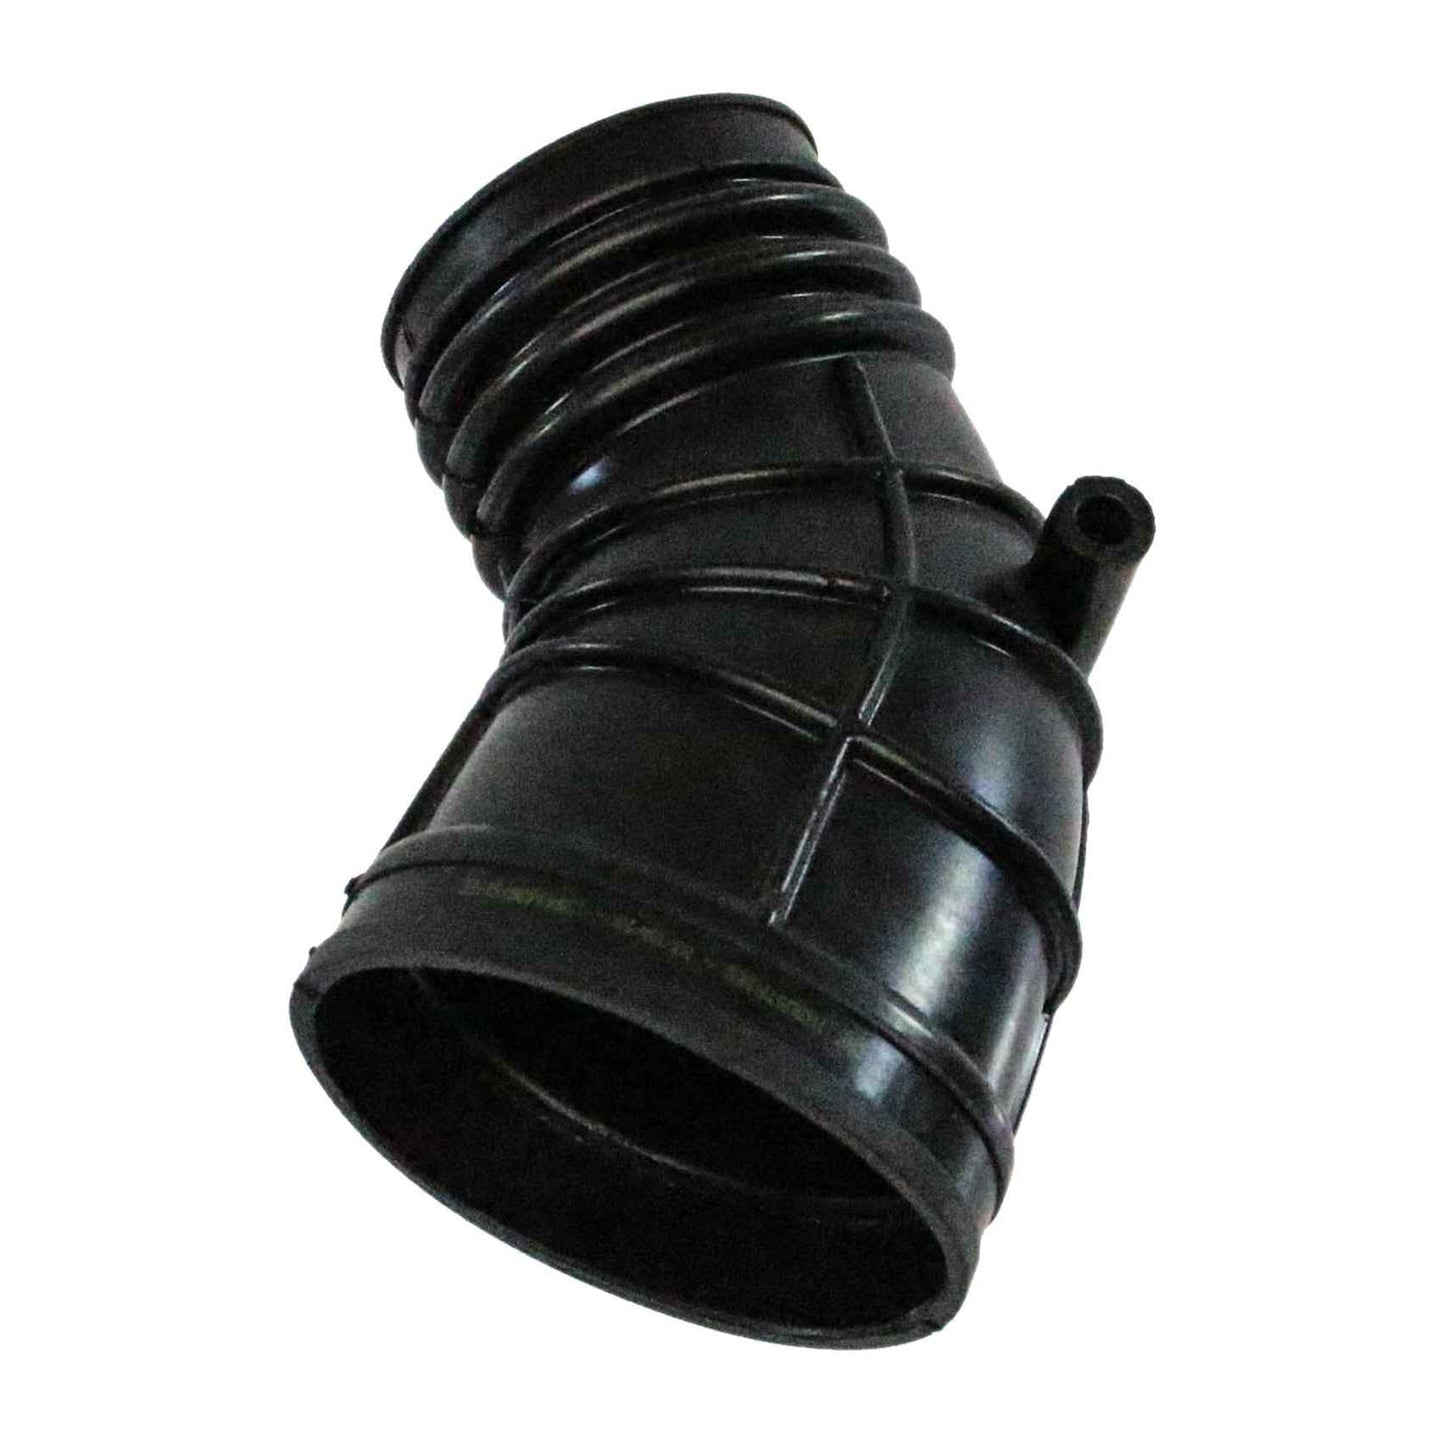 Left View of Fuel Injection Air Flow Meter Boot CRP ABV0136